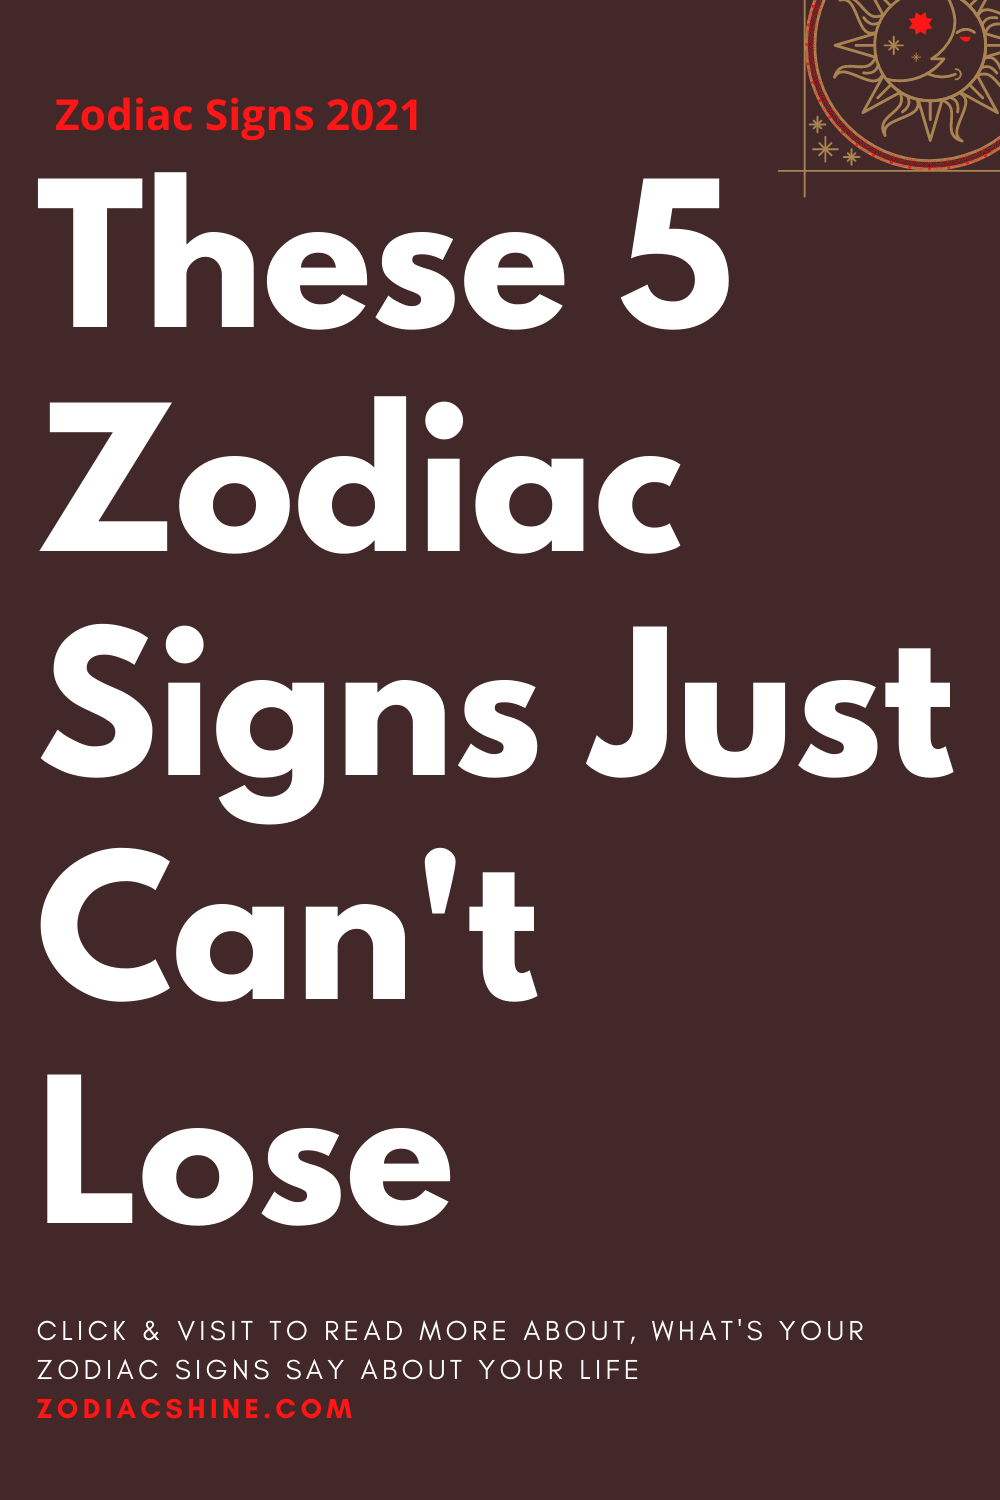 These 5 Zodiac Signs Just Can't Lose